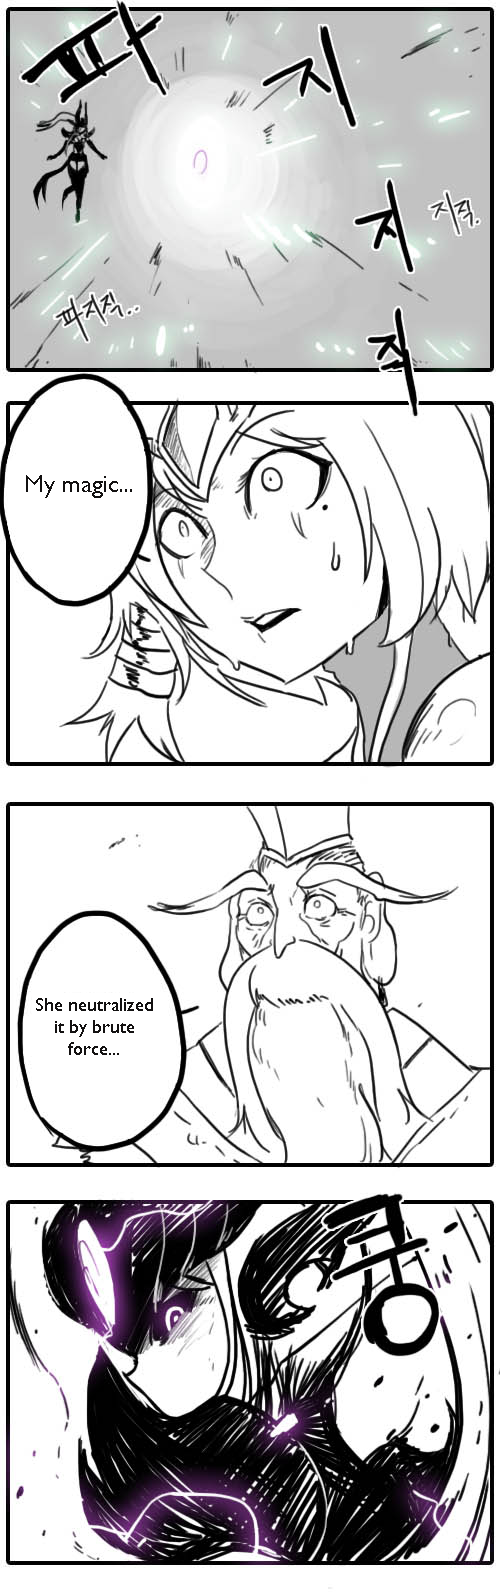 League of Legends Syndra & Zed's Everyday Life (Doujinshi) Vol. 1 Ch. 13